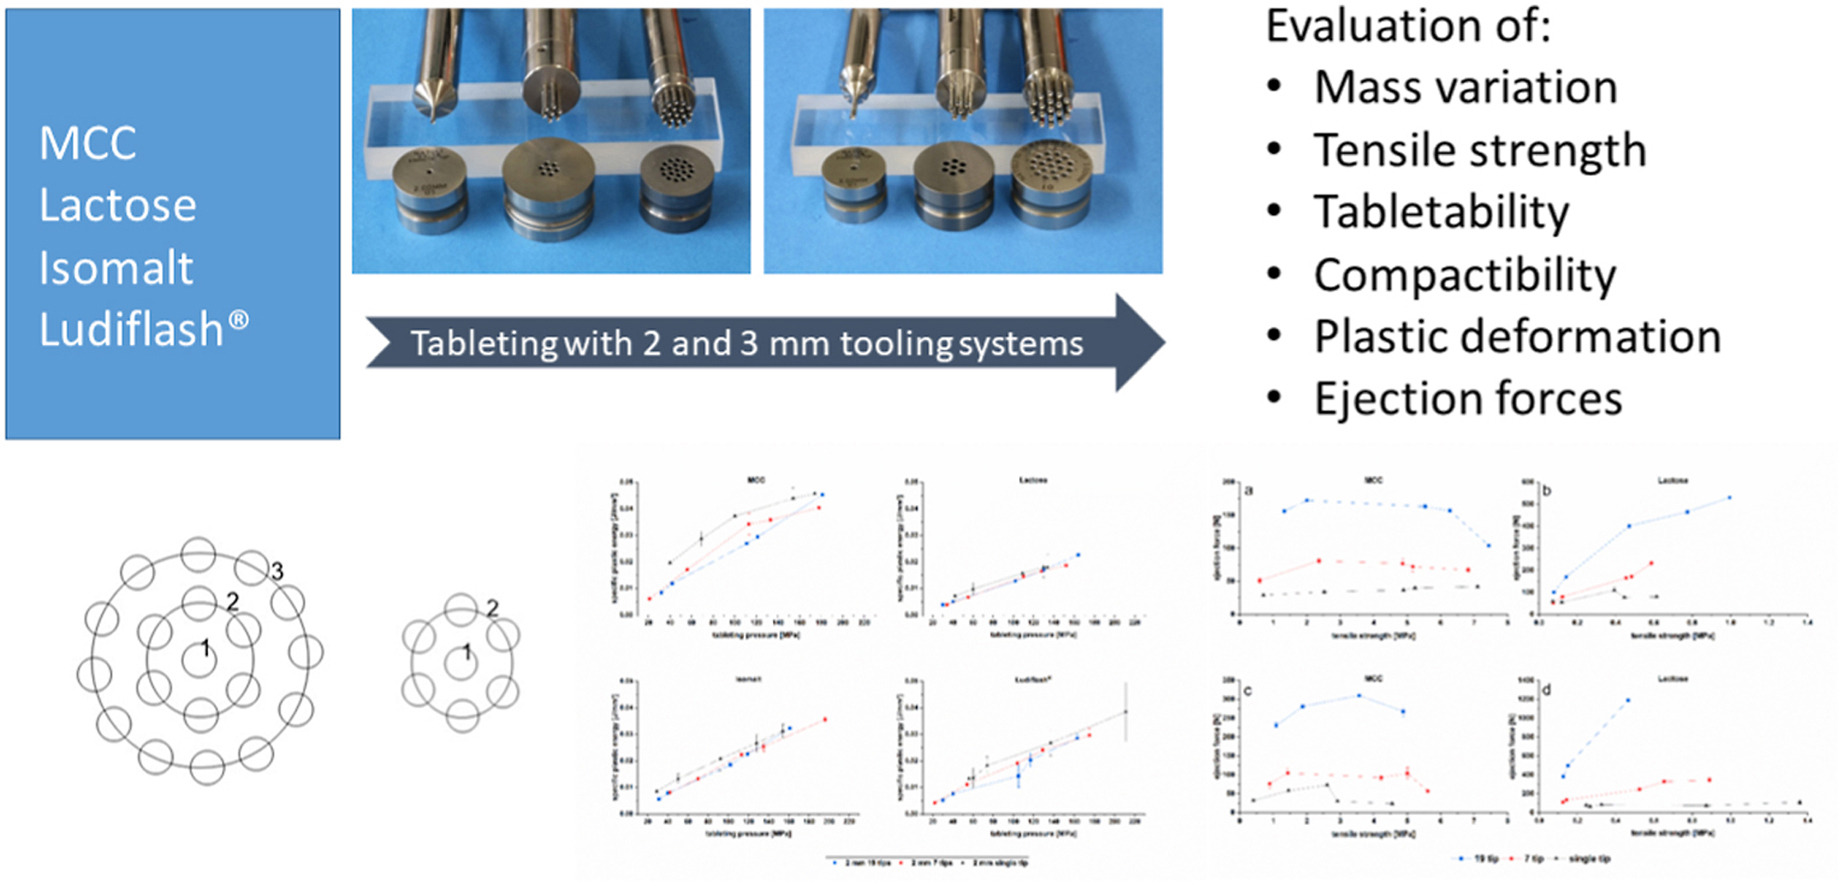 Manufacturing of mini-tablets. Focus and impact of the tooling systems